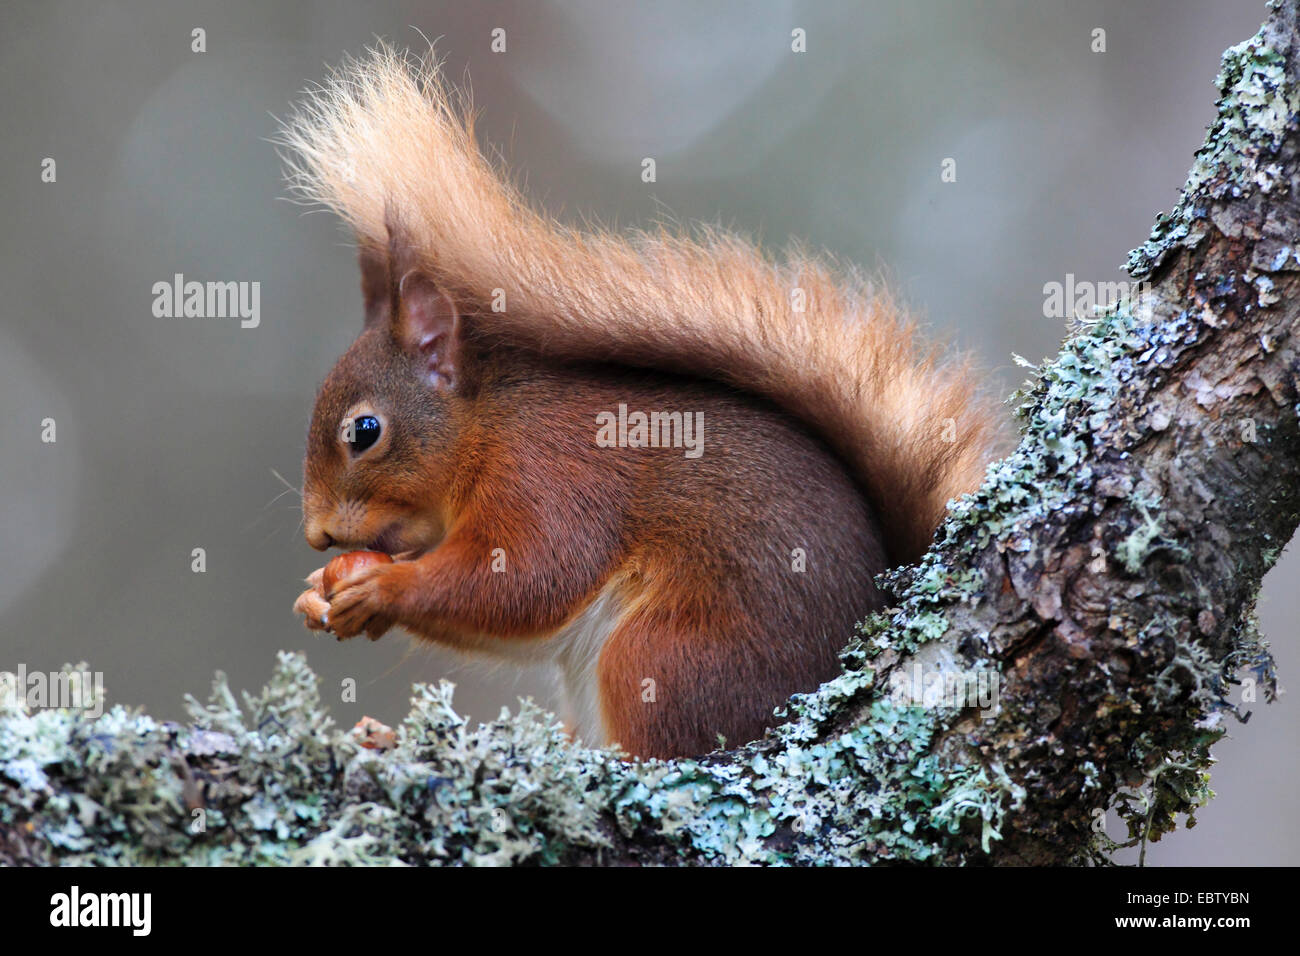 European red squirrel, Eurasian red squirrel (Sciurus vulgaris), sitting on a branch with hazelnut in its paws, United Kingdom, Scotland, Cairngorms National Park Stock Photo